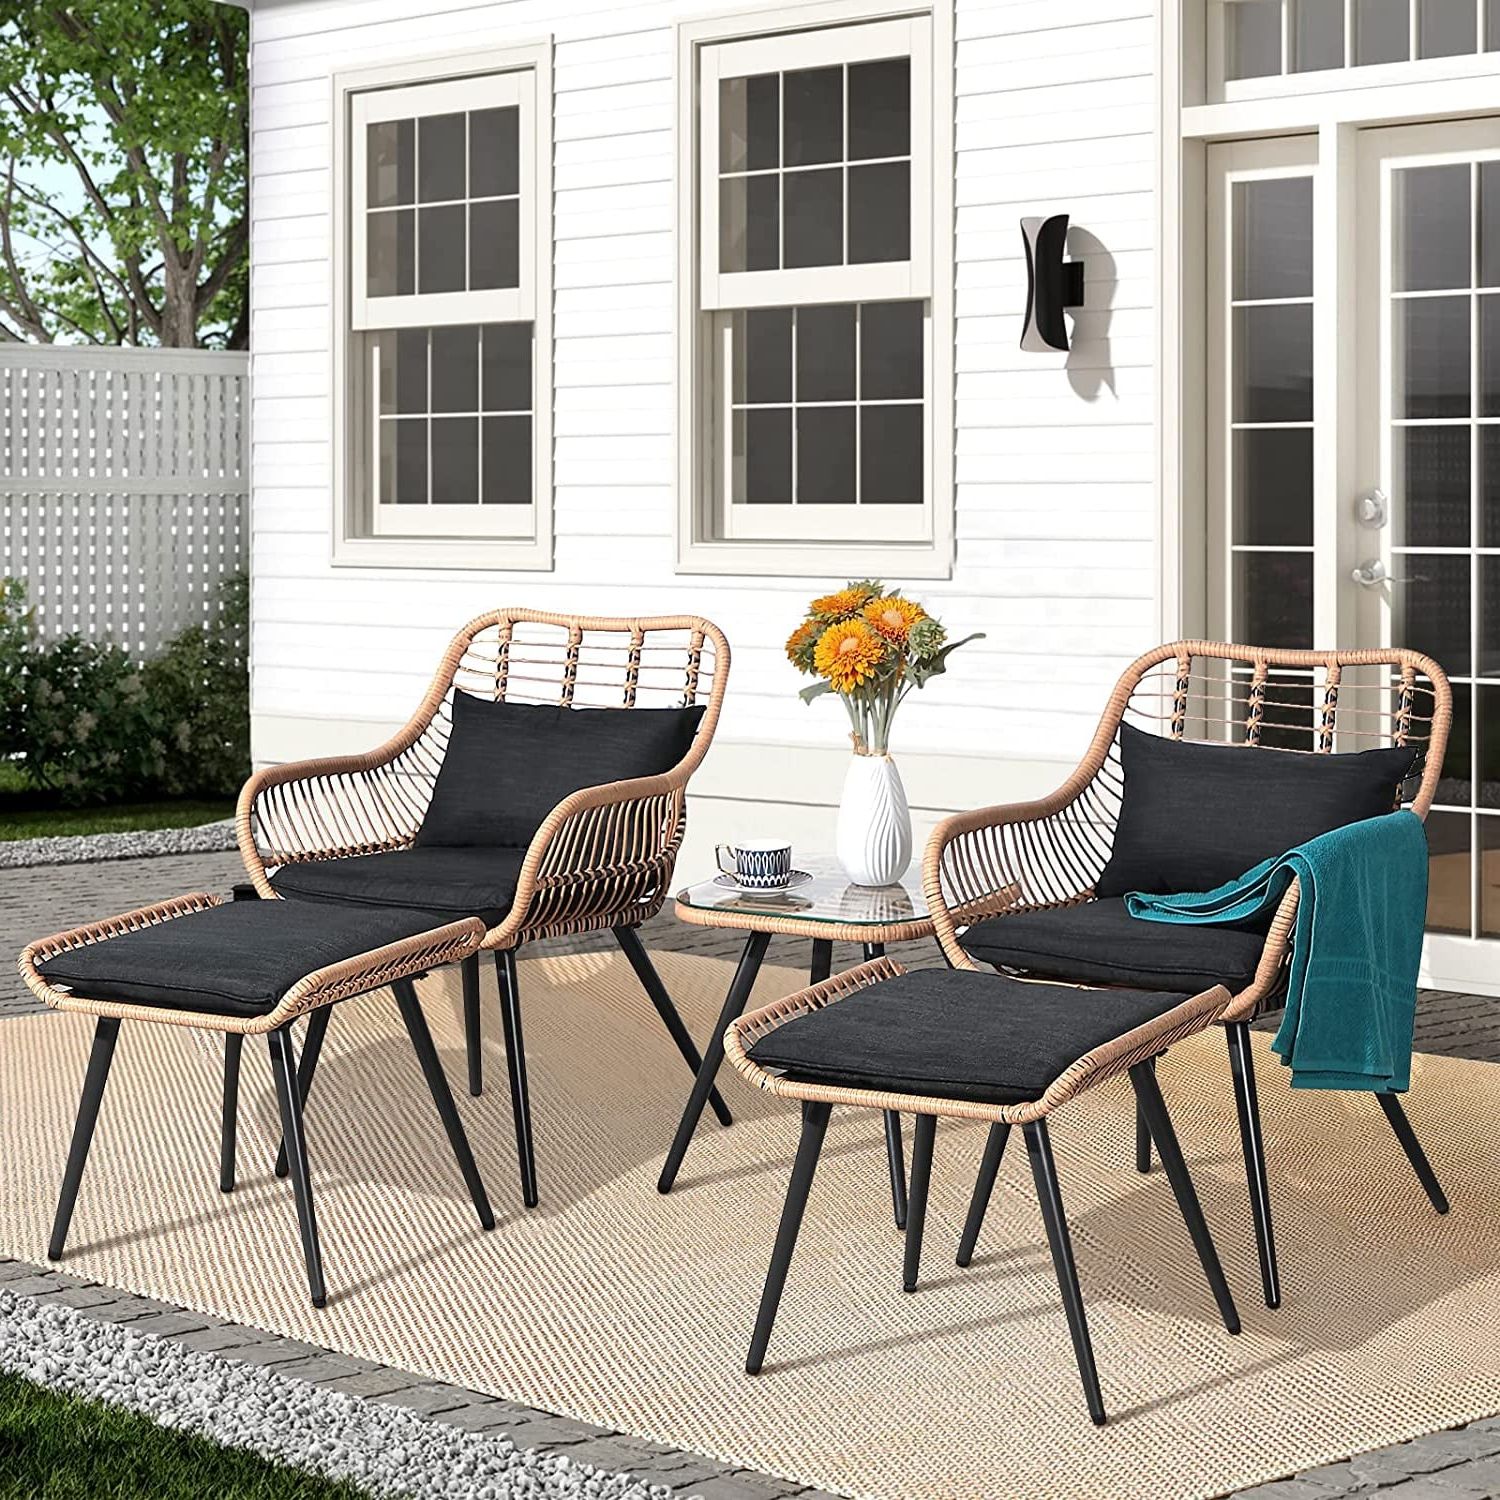 2019 Affordable Midcentury Modern Outdoor Furniture  (View 7 of 15)